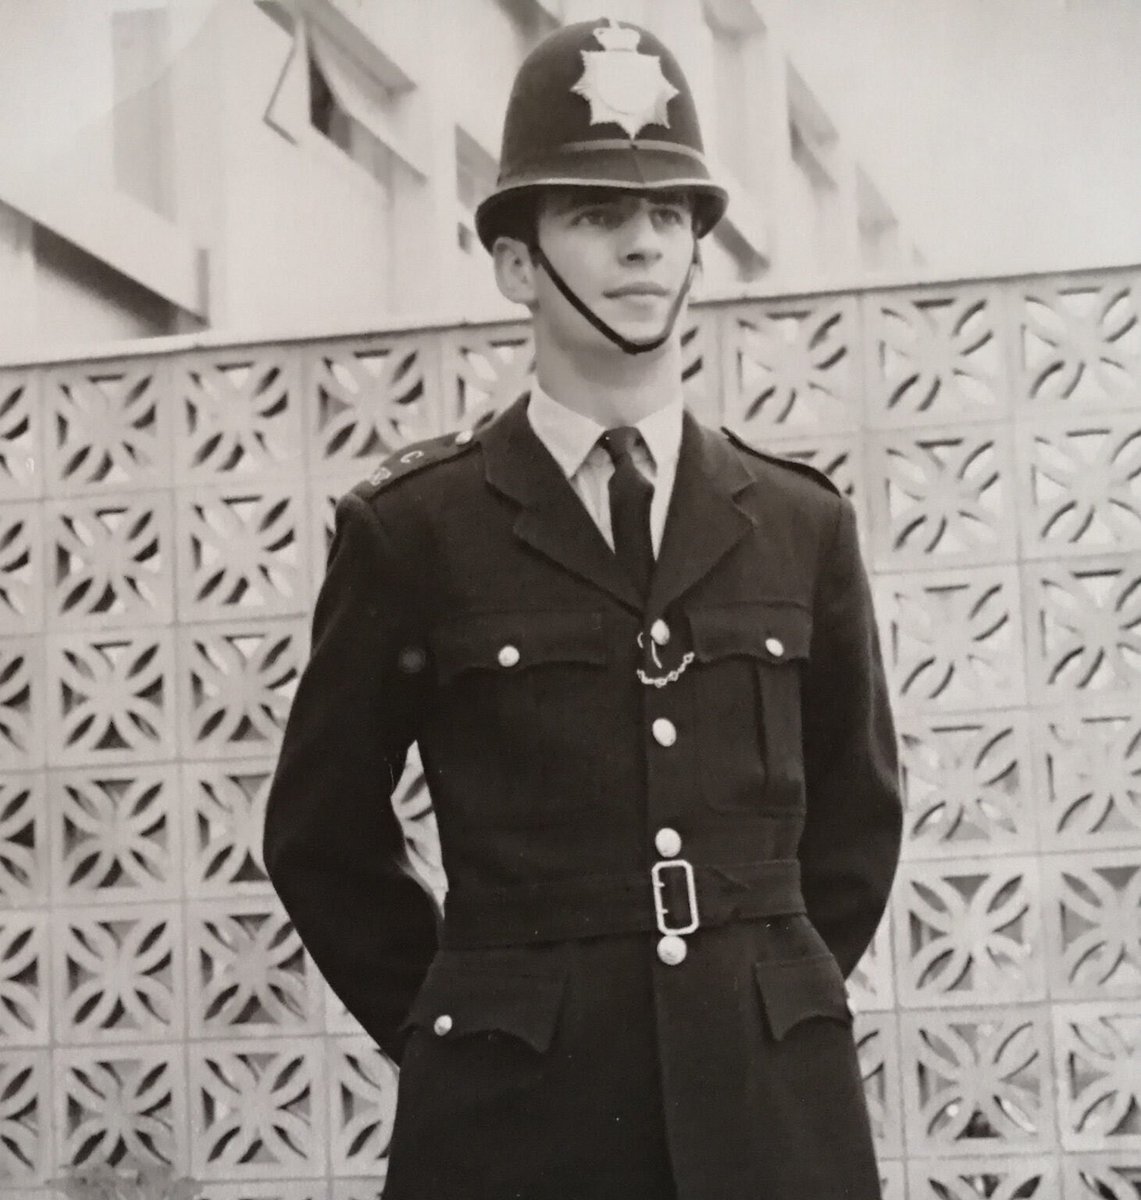 Remembering PC Michael Whiting, of the Metropolitan Police, killed on duty on this day in 1973 #LestWeForget